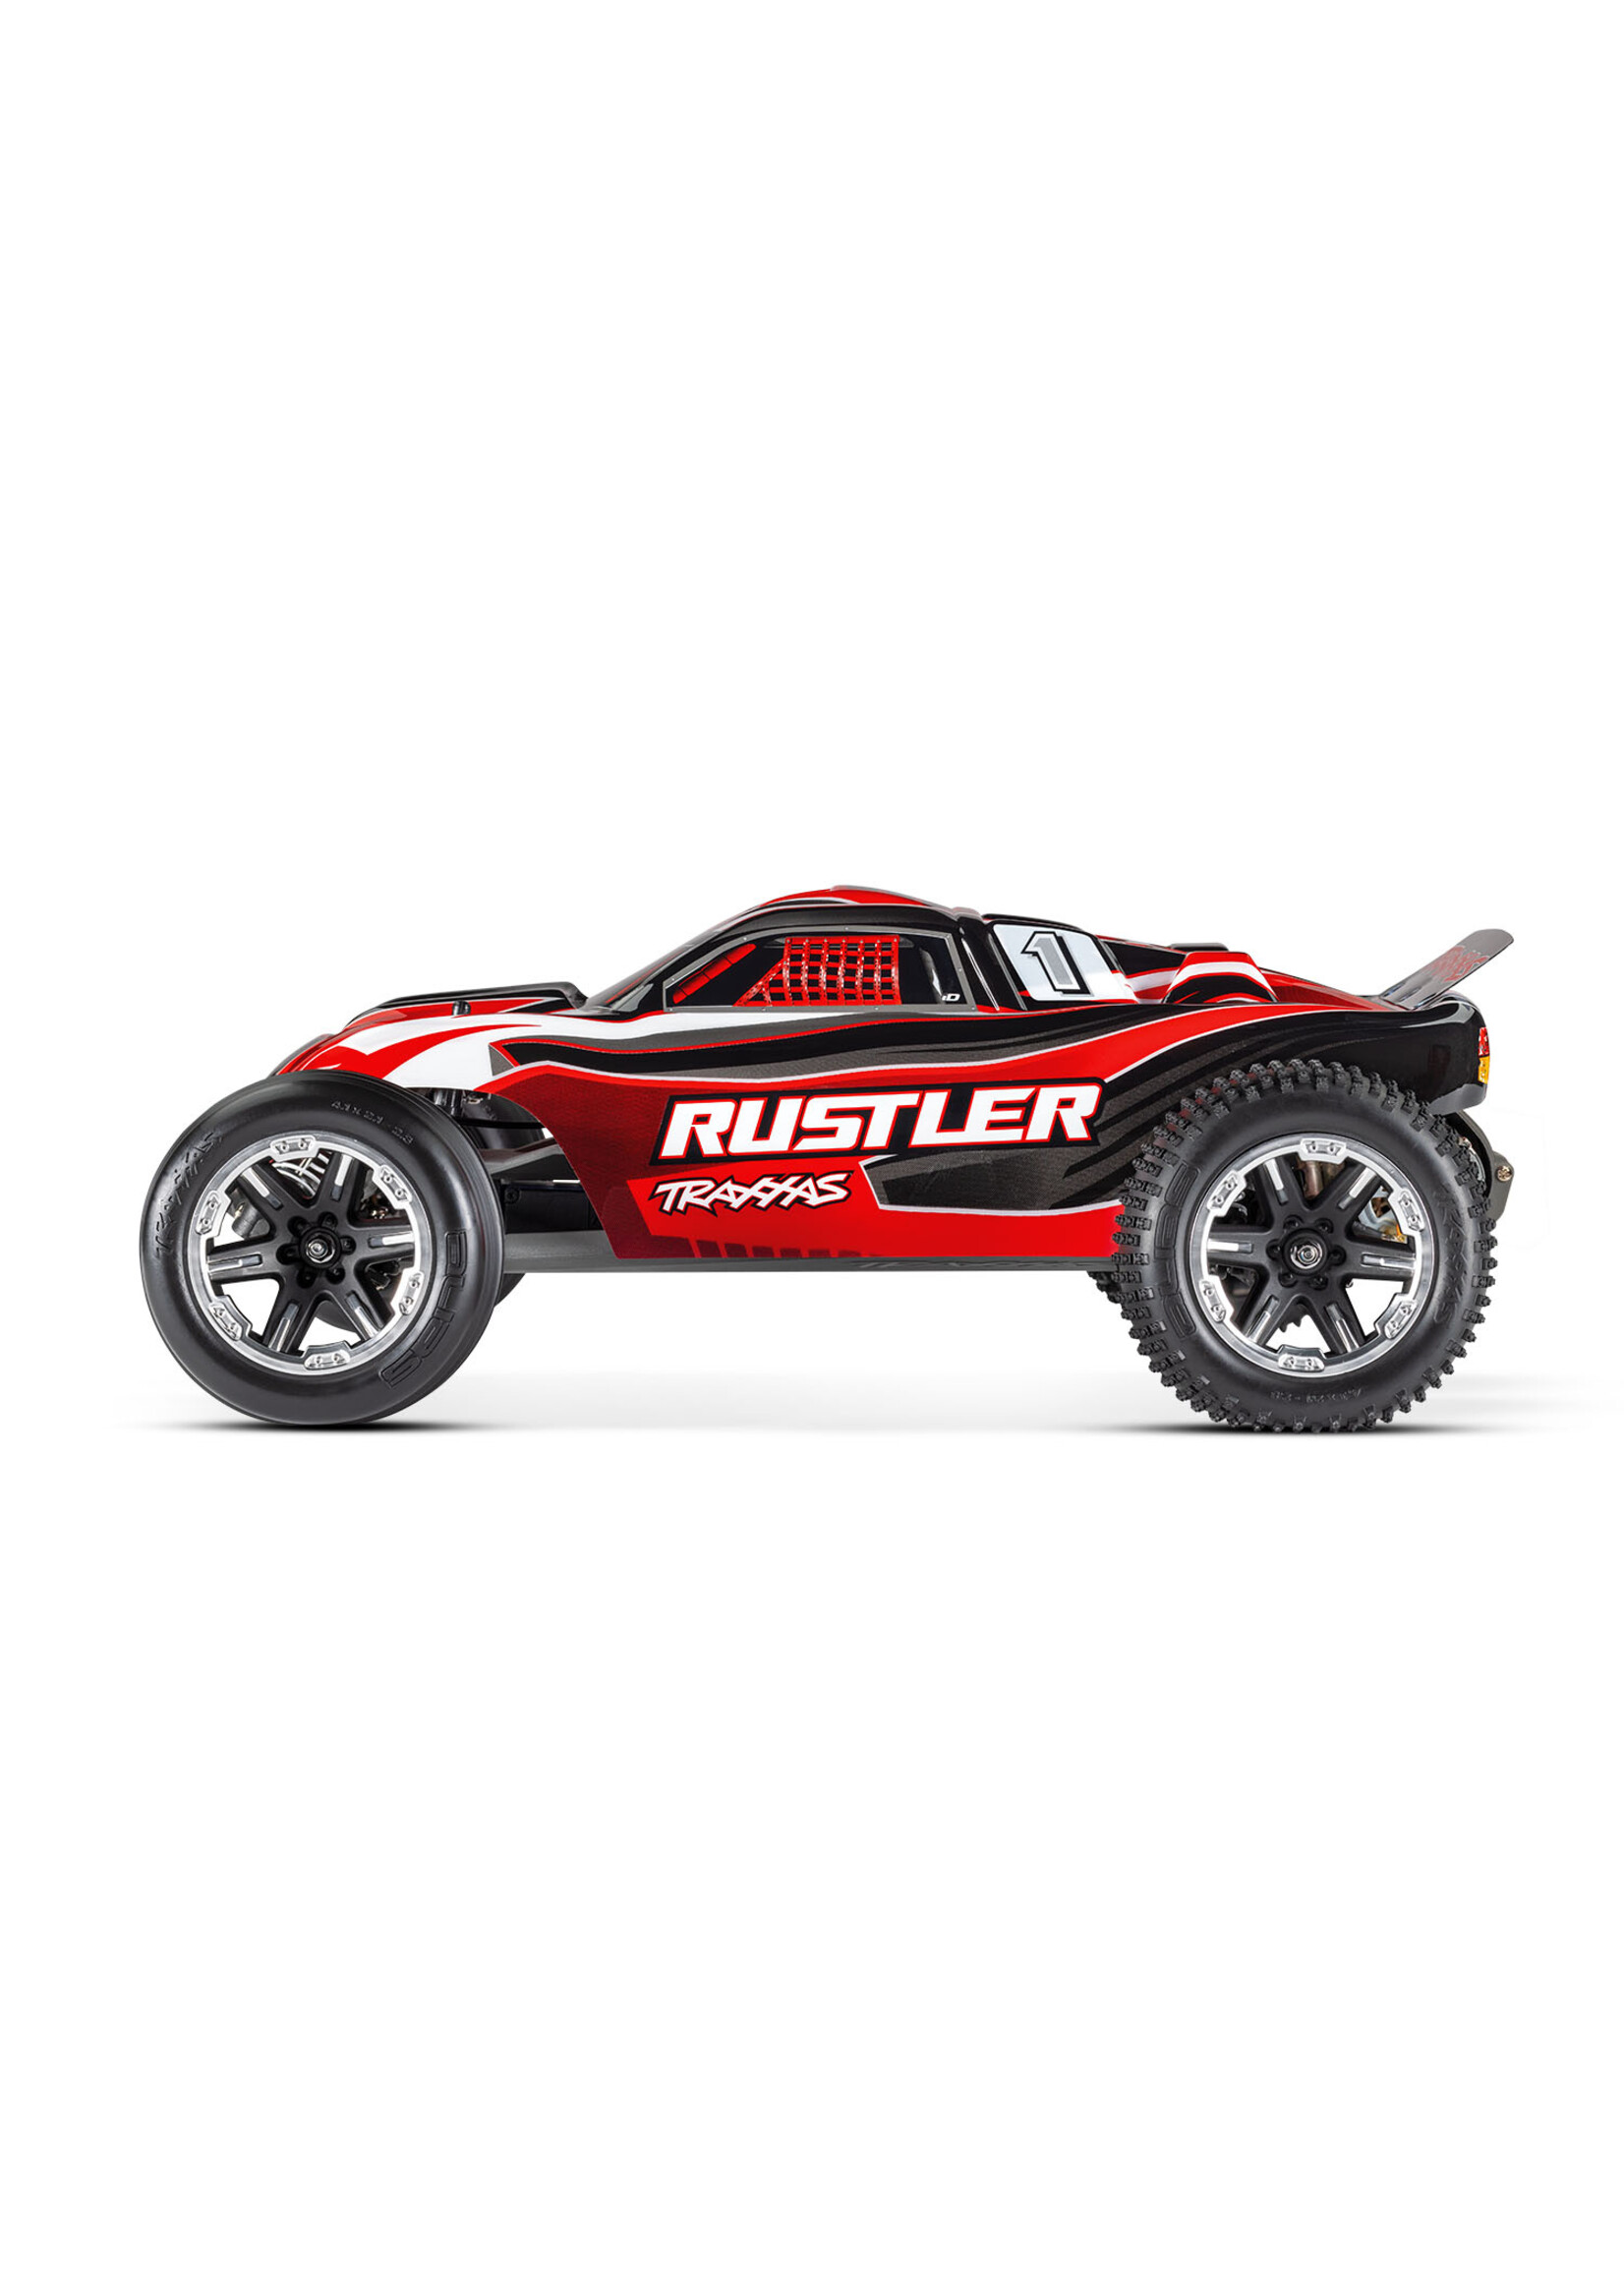 Traxxas 1/10 Rustler Stadium Truck With USB-C Charger - Red